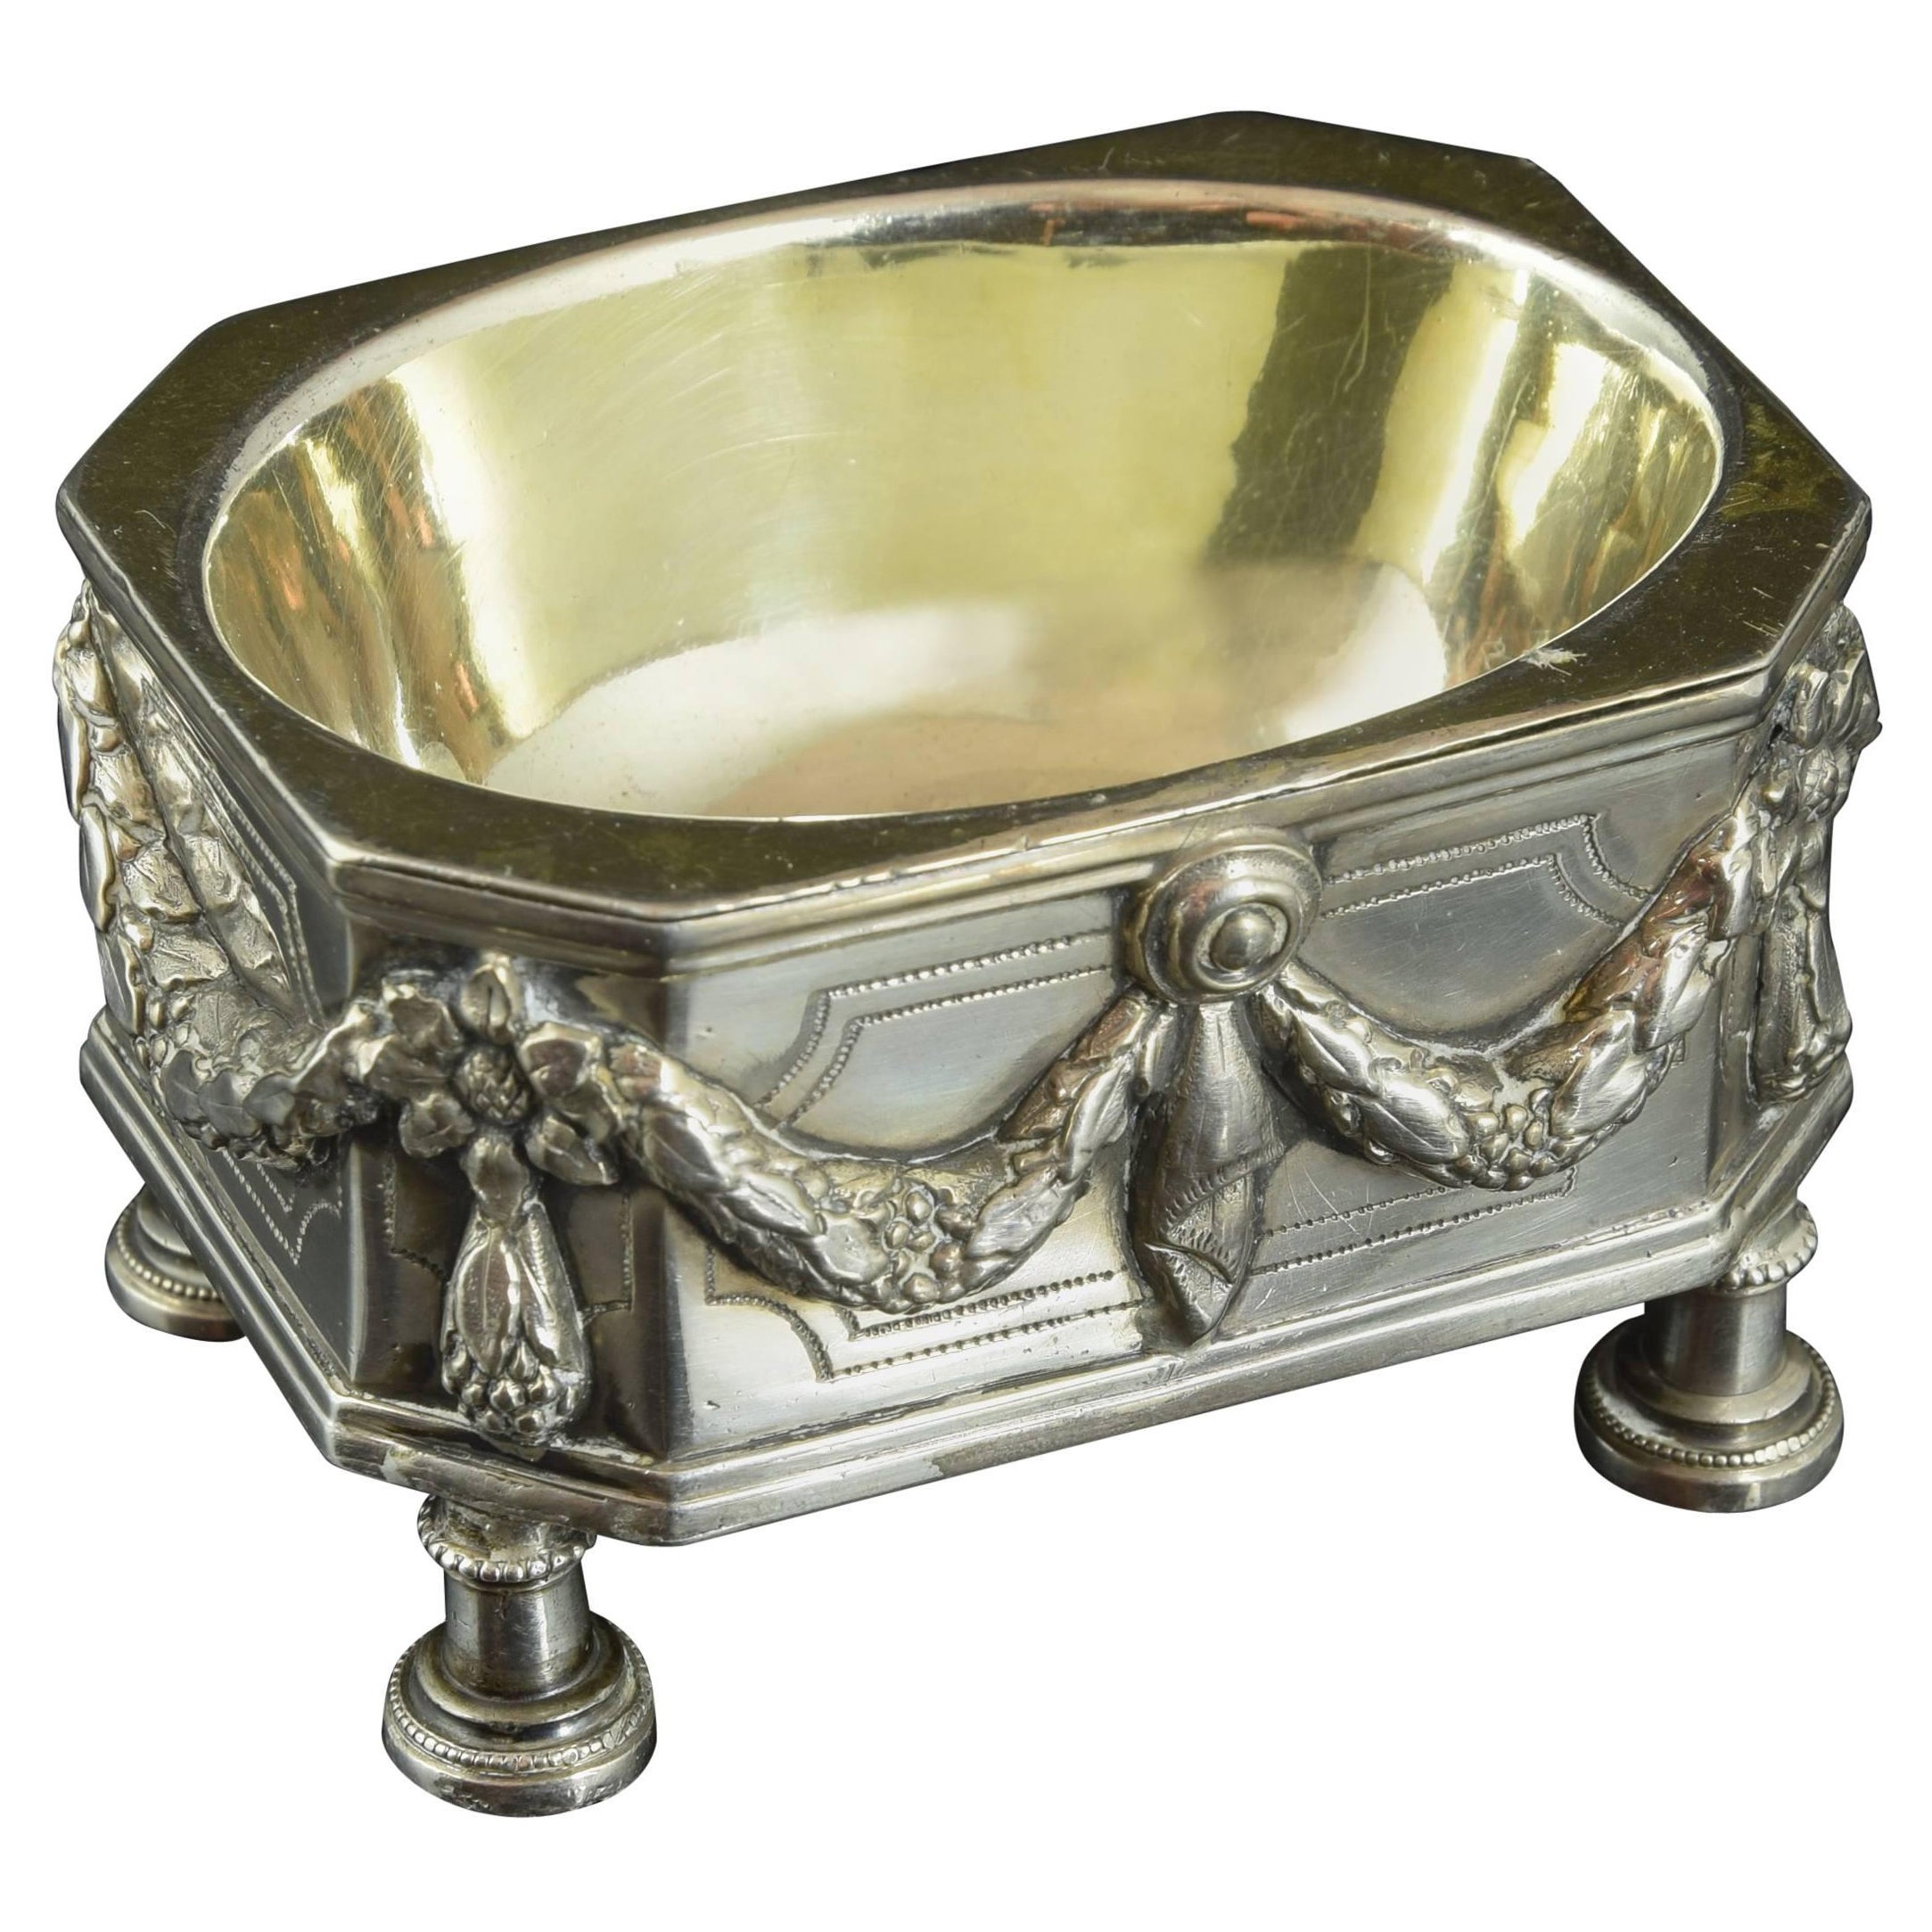 Silver Spices "Box", Stefano Olivero, Italy, Possibly 19th Century